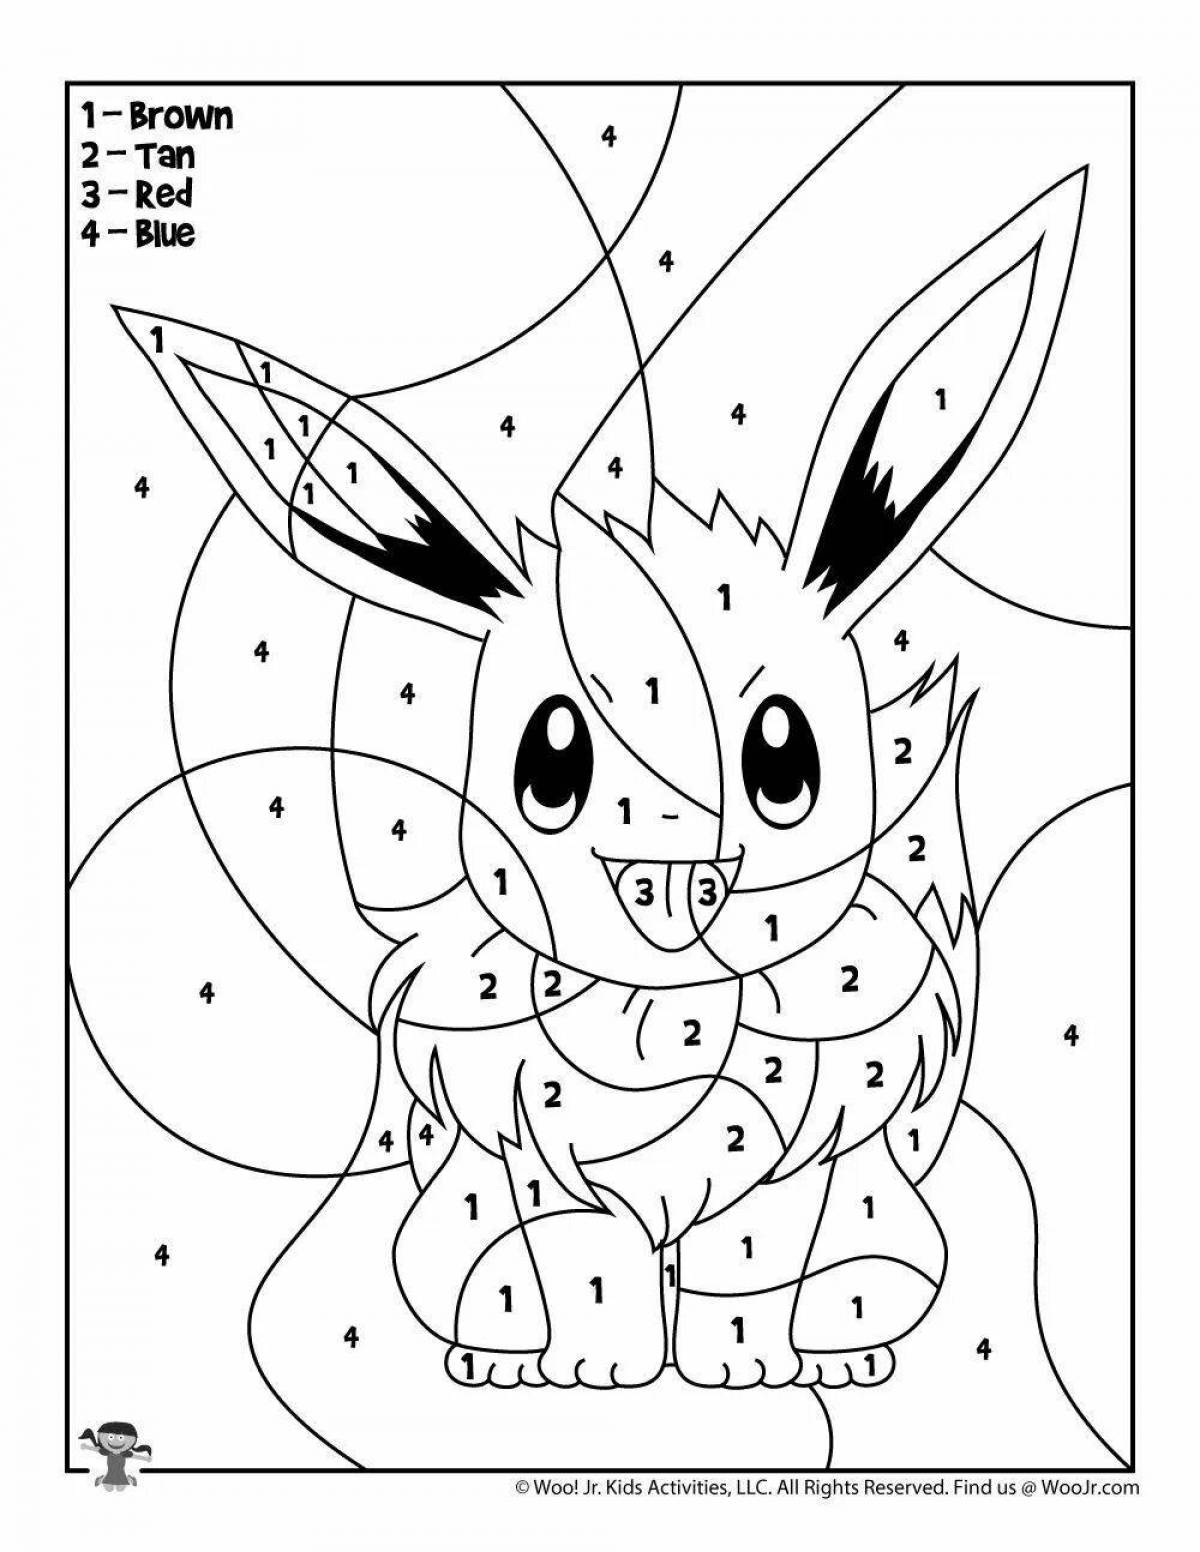 Charming anime by numbers coloring book